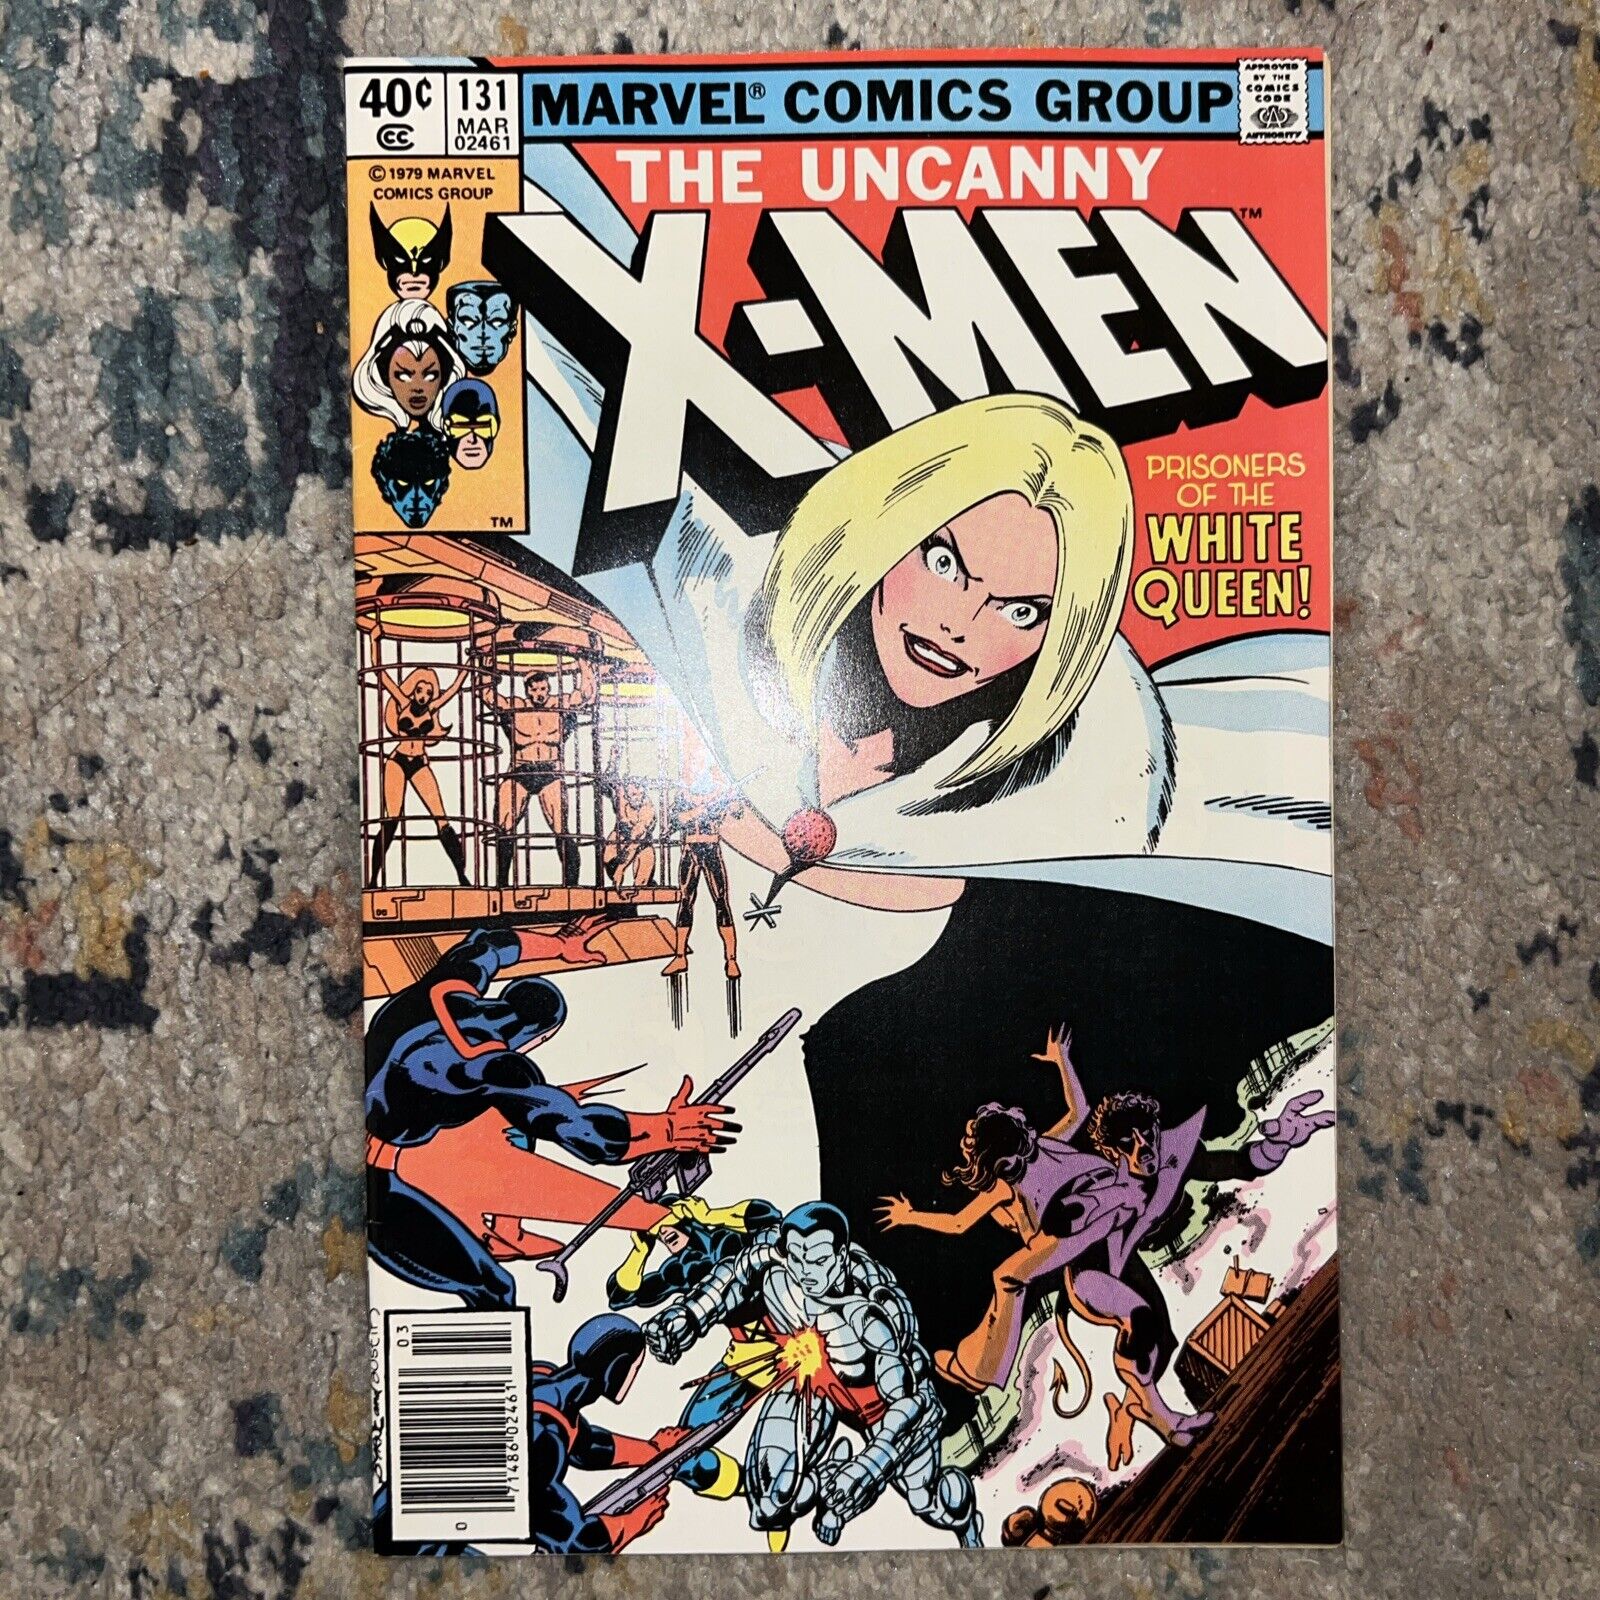 1979 The Uncanny X-Men Issue #131 Comic Book-WHITE QUEEN-Great Shape 2